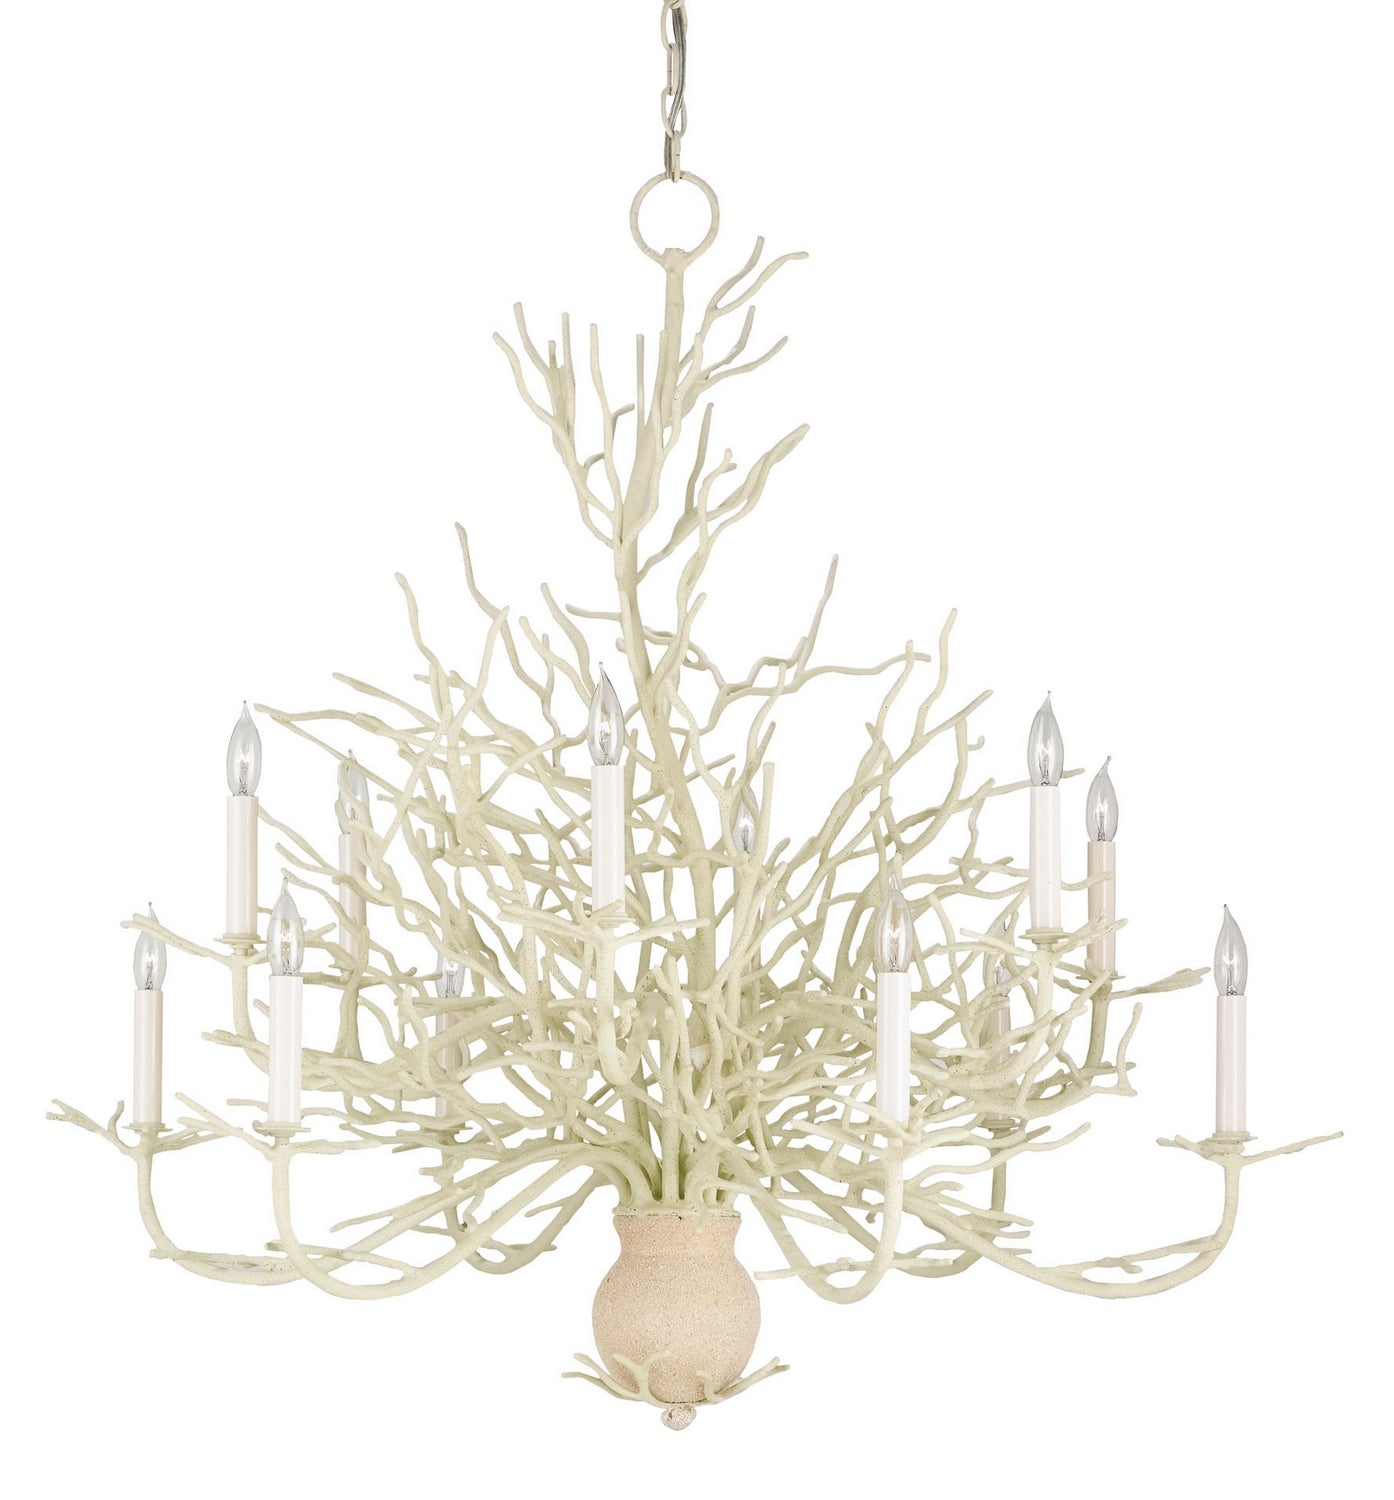 12 Light Chandelier from the Seaward collection in White Coral/Natural Sand finish